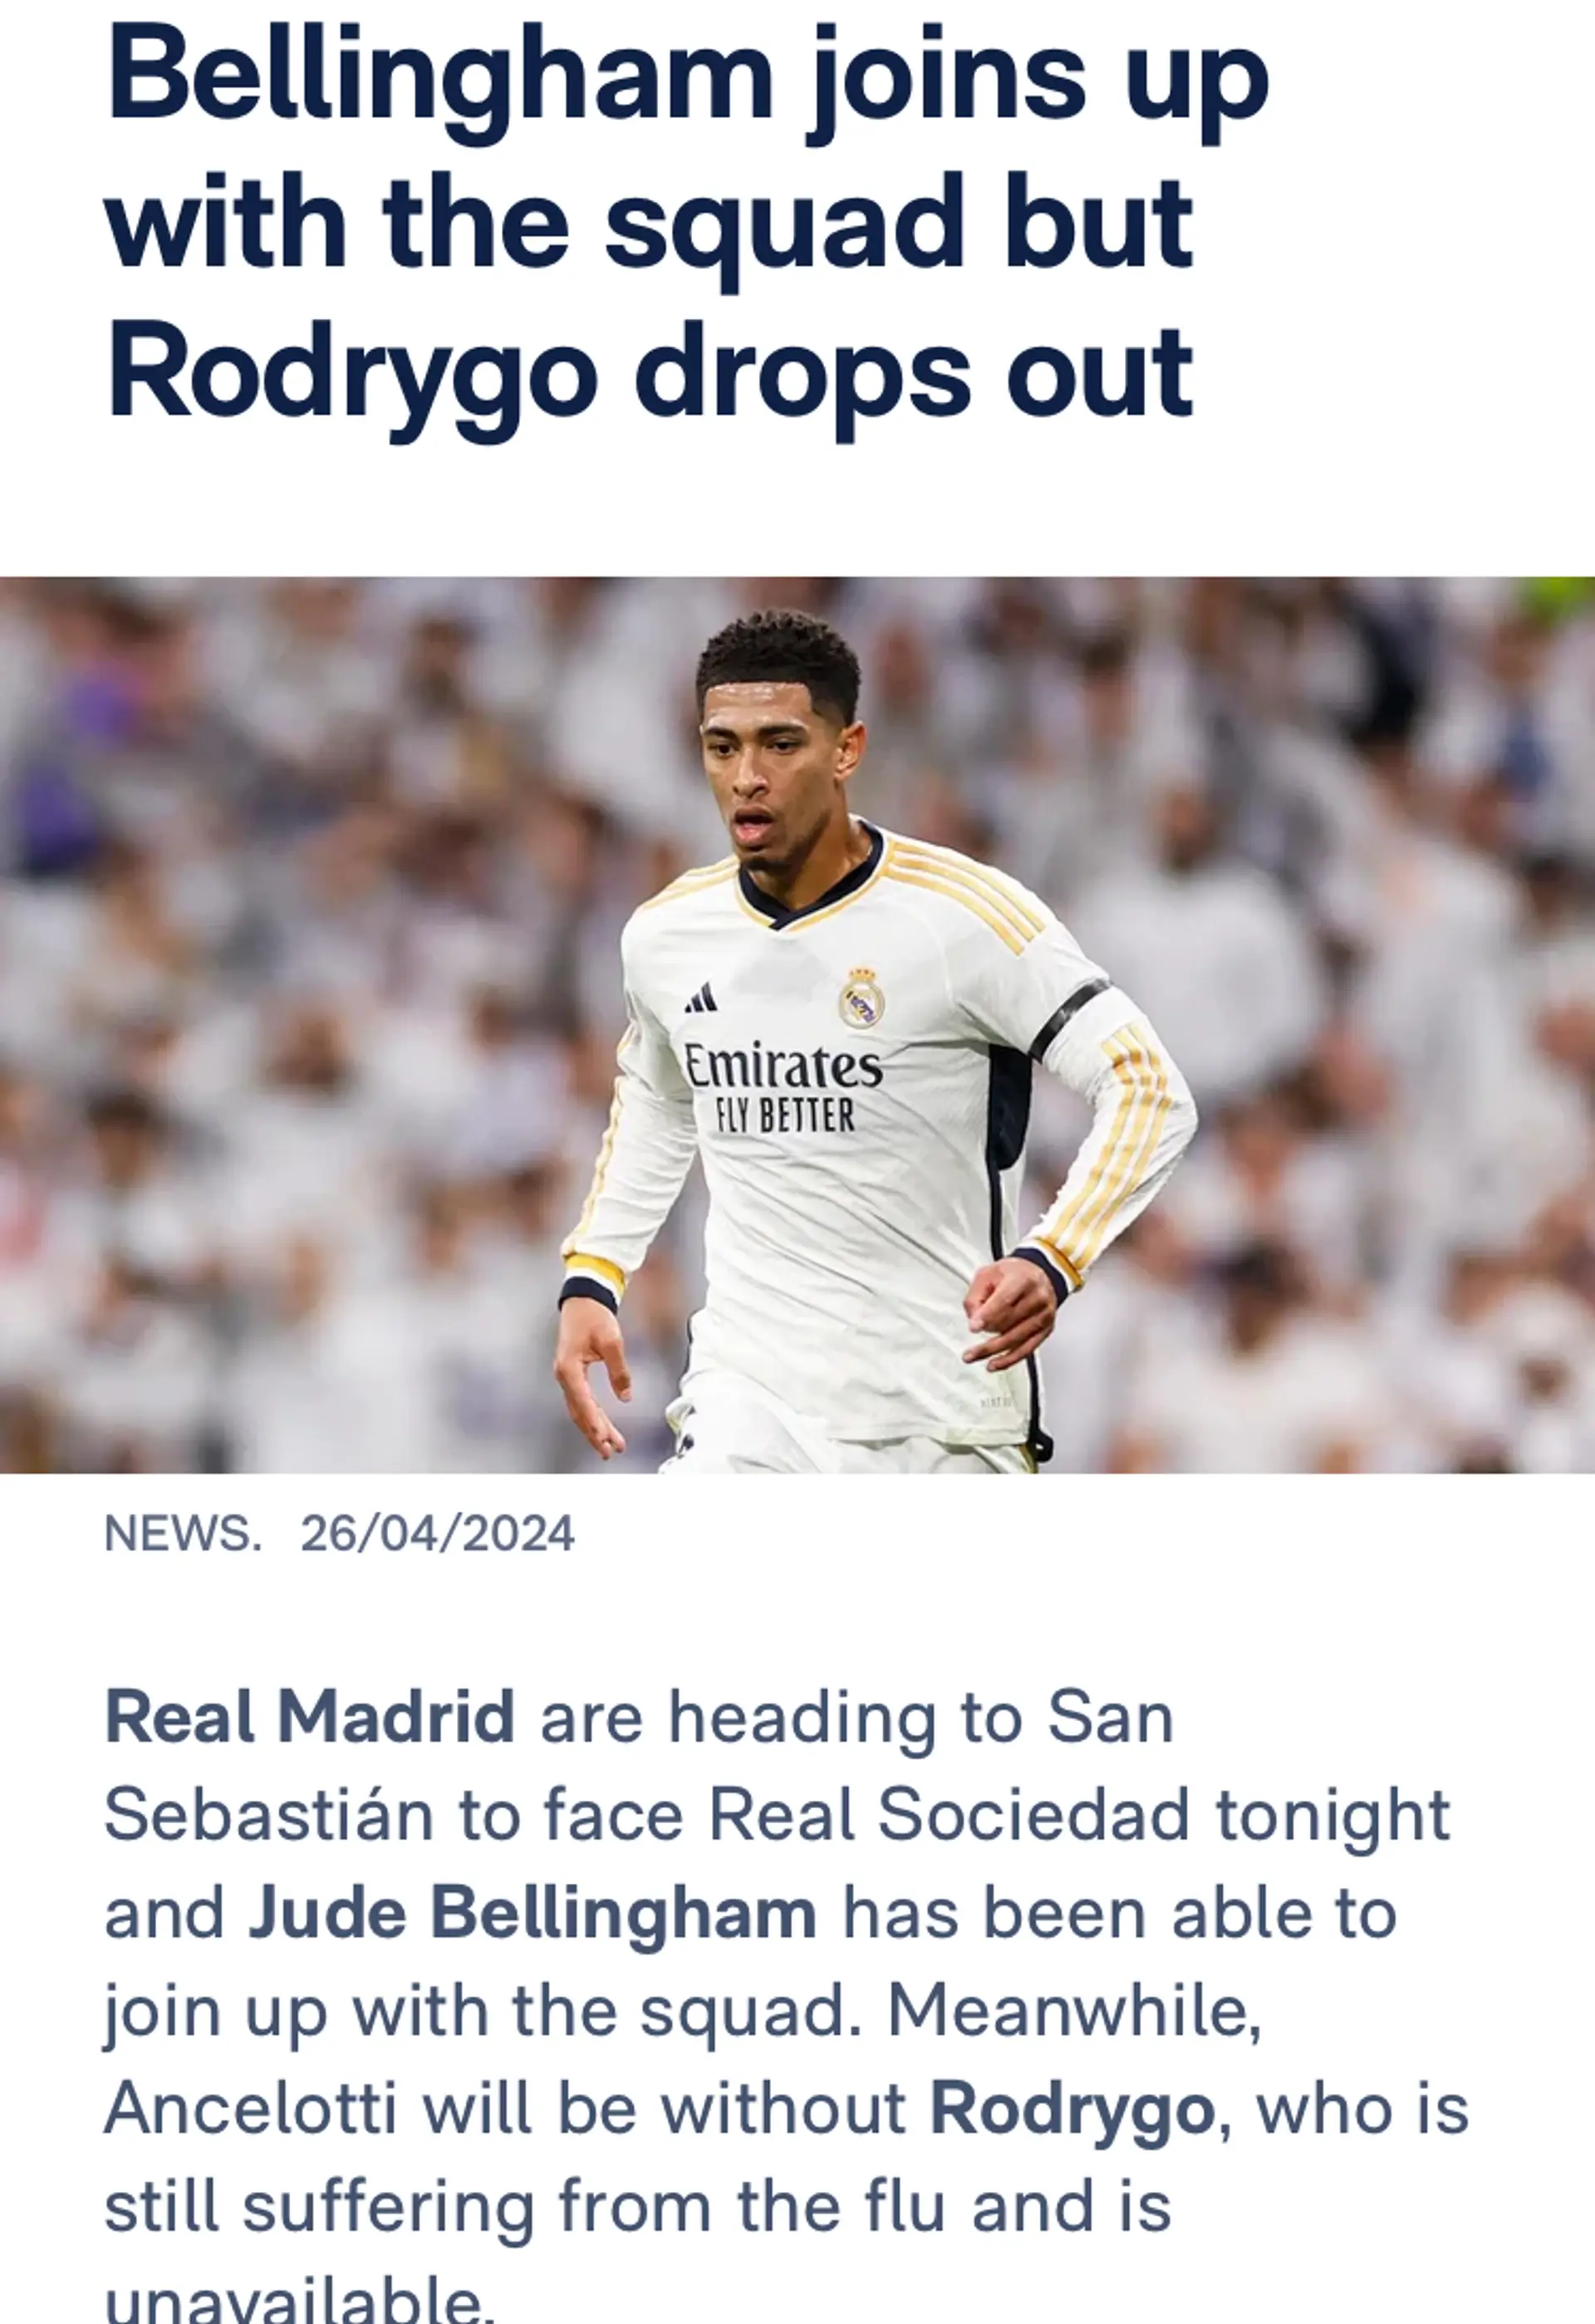 A big boost for tonight let’s hope rodrygo injury is not too serious